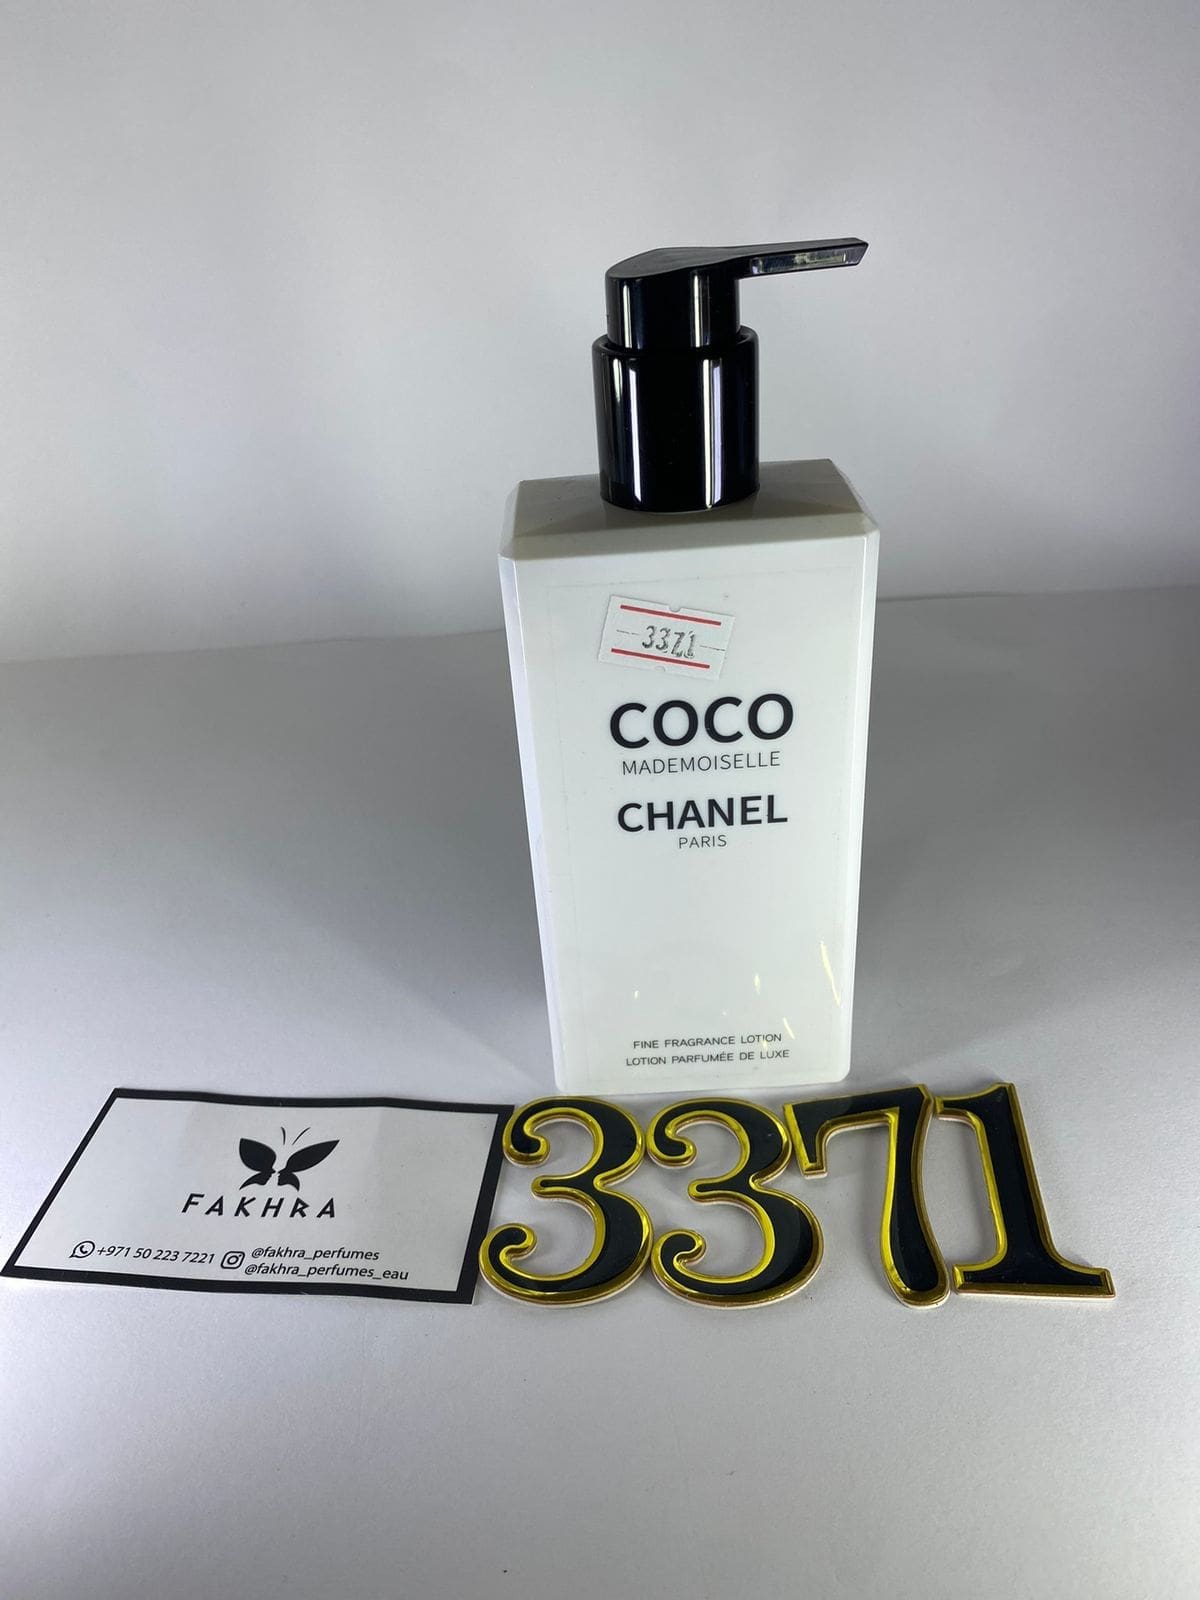 3371 CHANEL COCO MADEMOISELLE LOTION